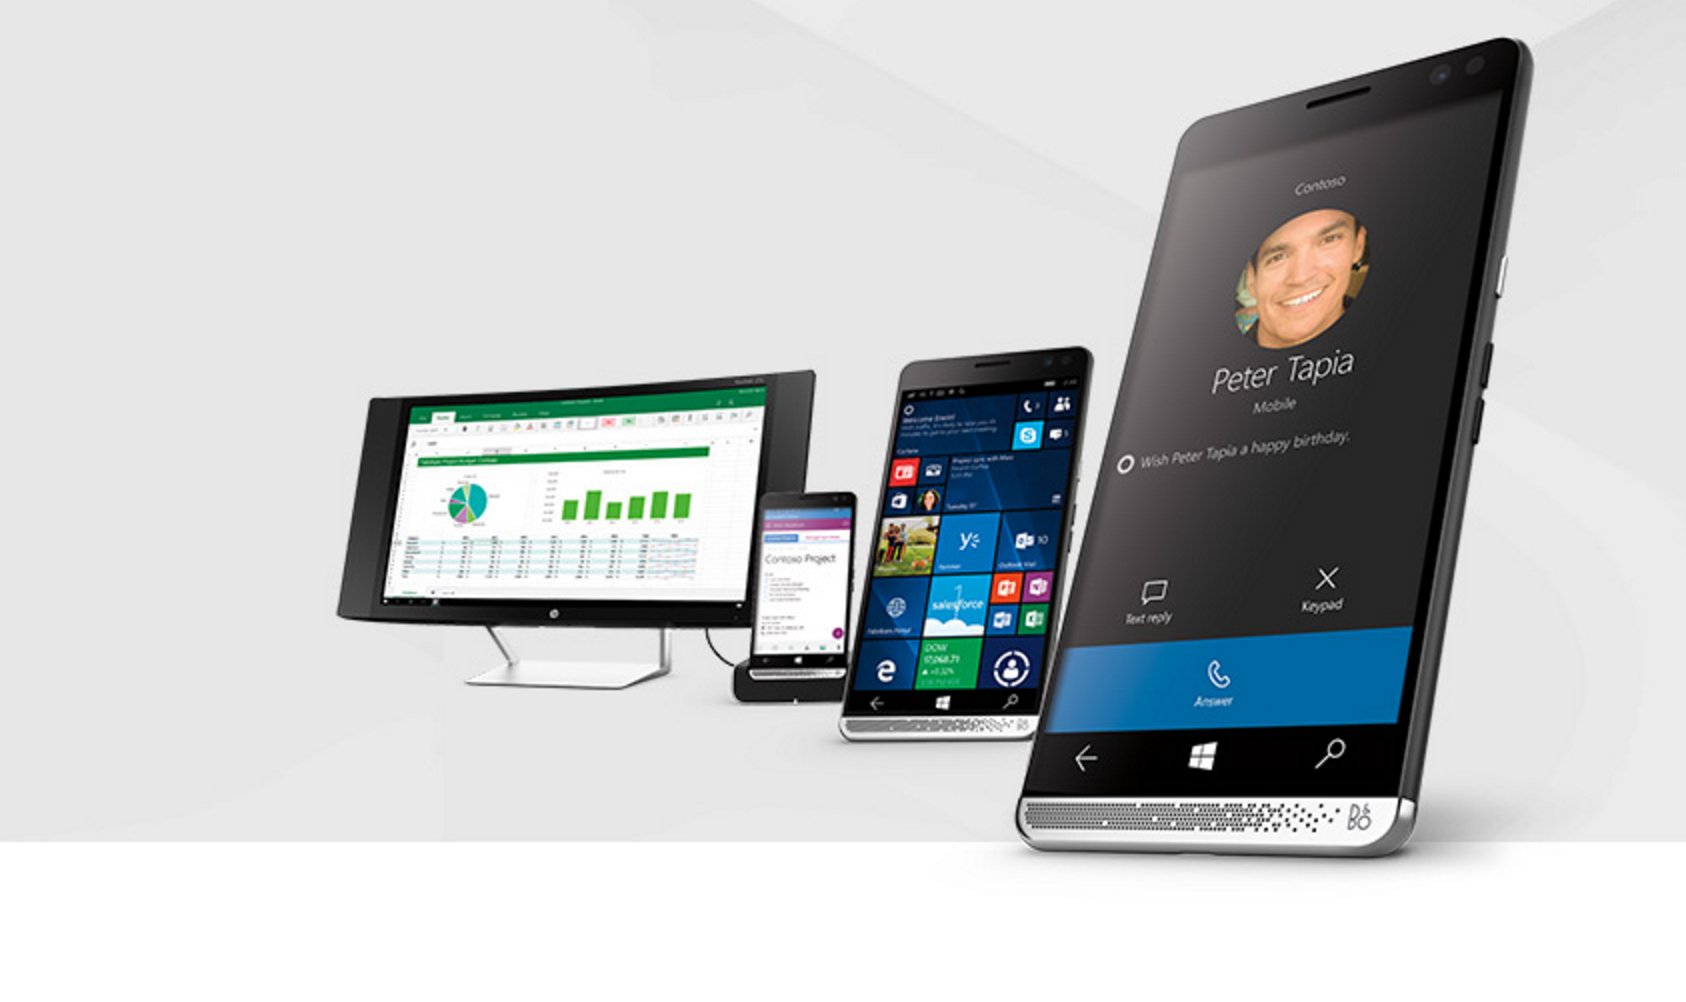 PSA: HP Elite x3 might not be compatible with Verizon’s network